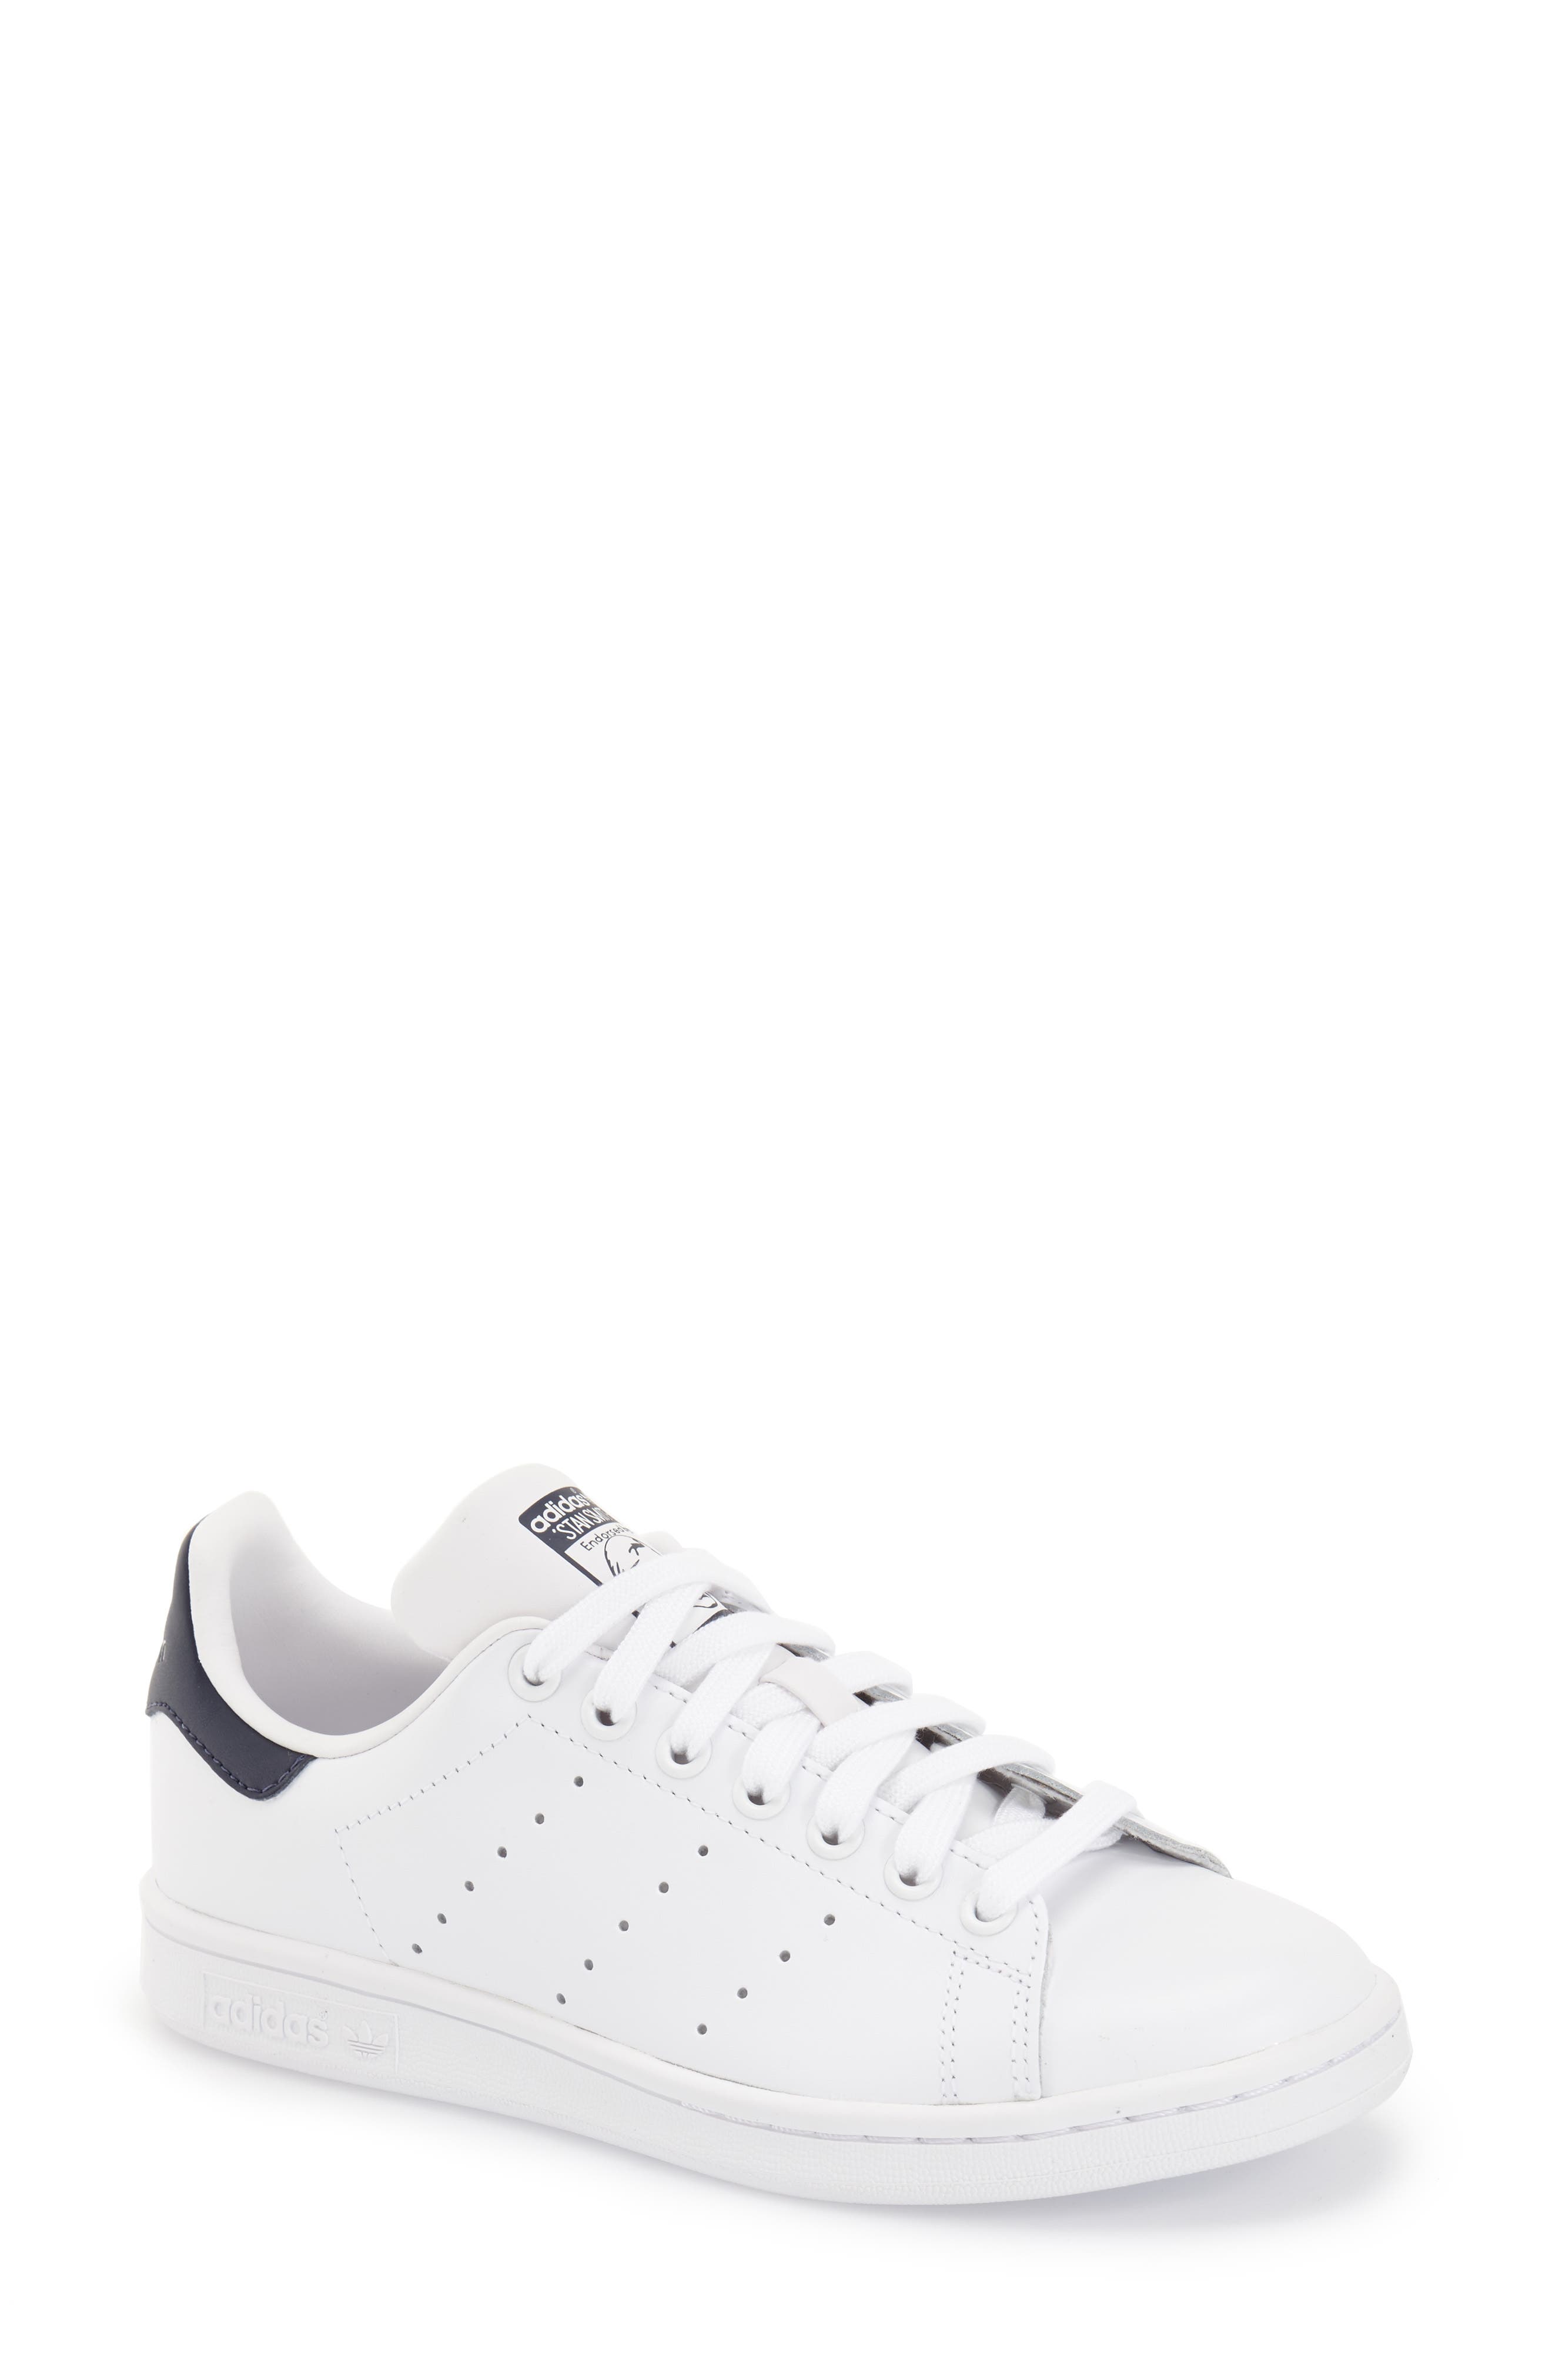 nordstrom white leather sneakers